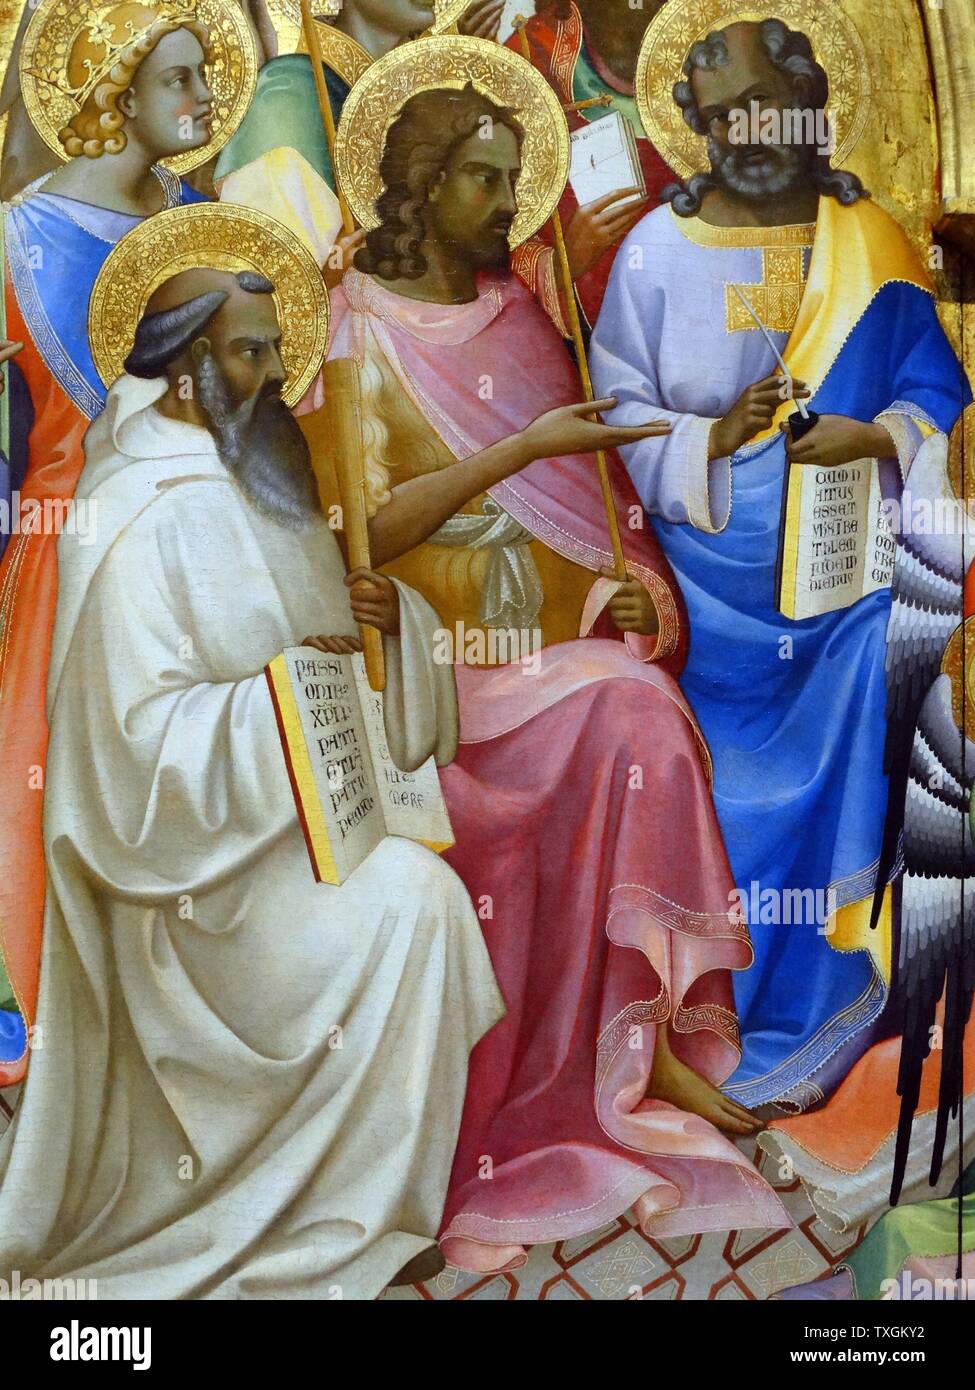 Detail from the painting titled 'The Coronation of the Virgin with Adoring Saints' by Lorenzo Monaco (1370-1425) an Italian painter of the late Gothic-early Renaissance age. Dated 15th Century Stock Photo